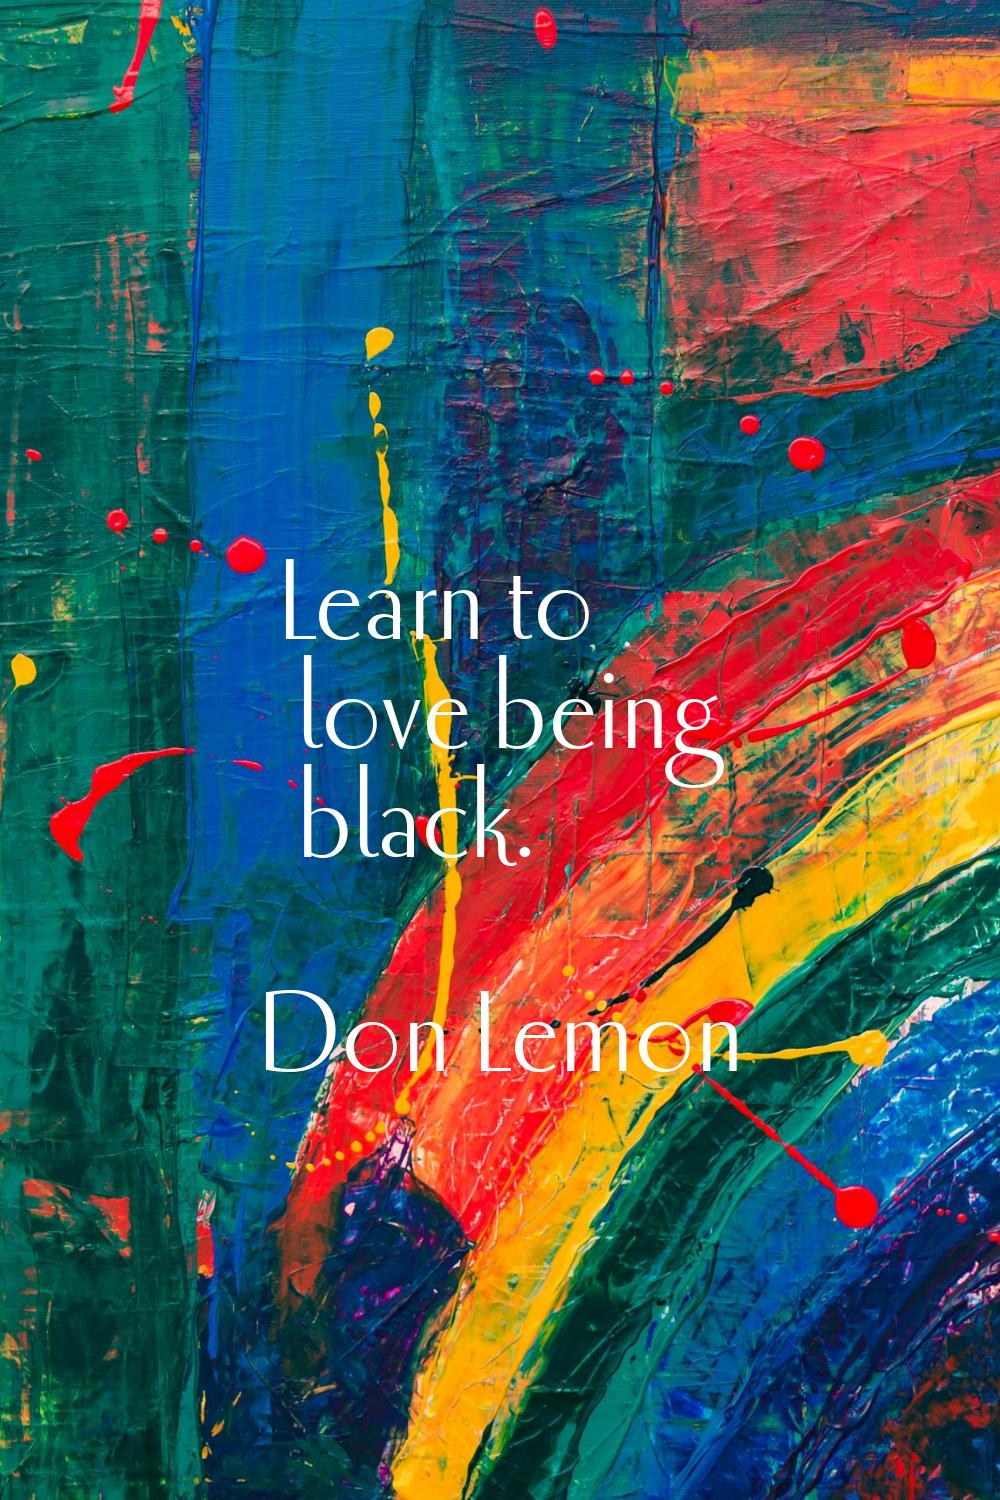 Learn to love being black.